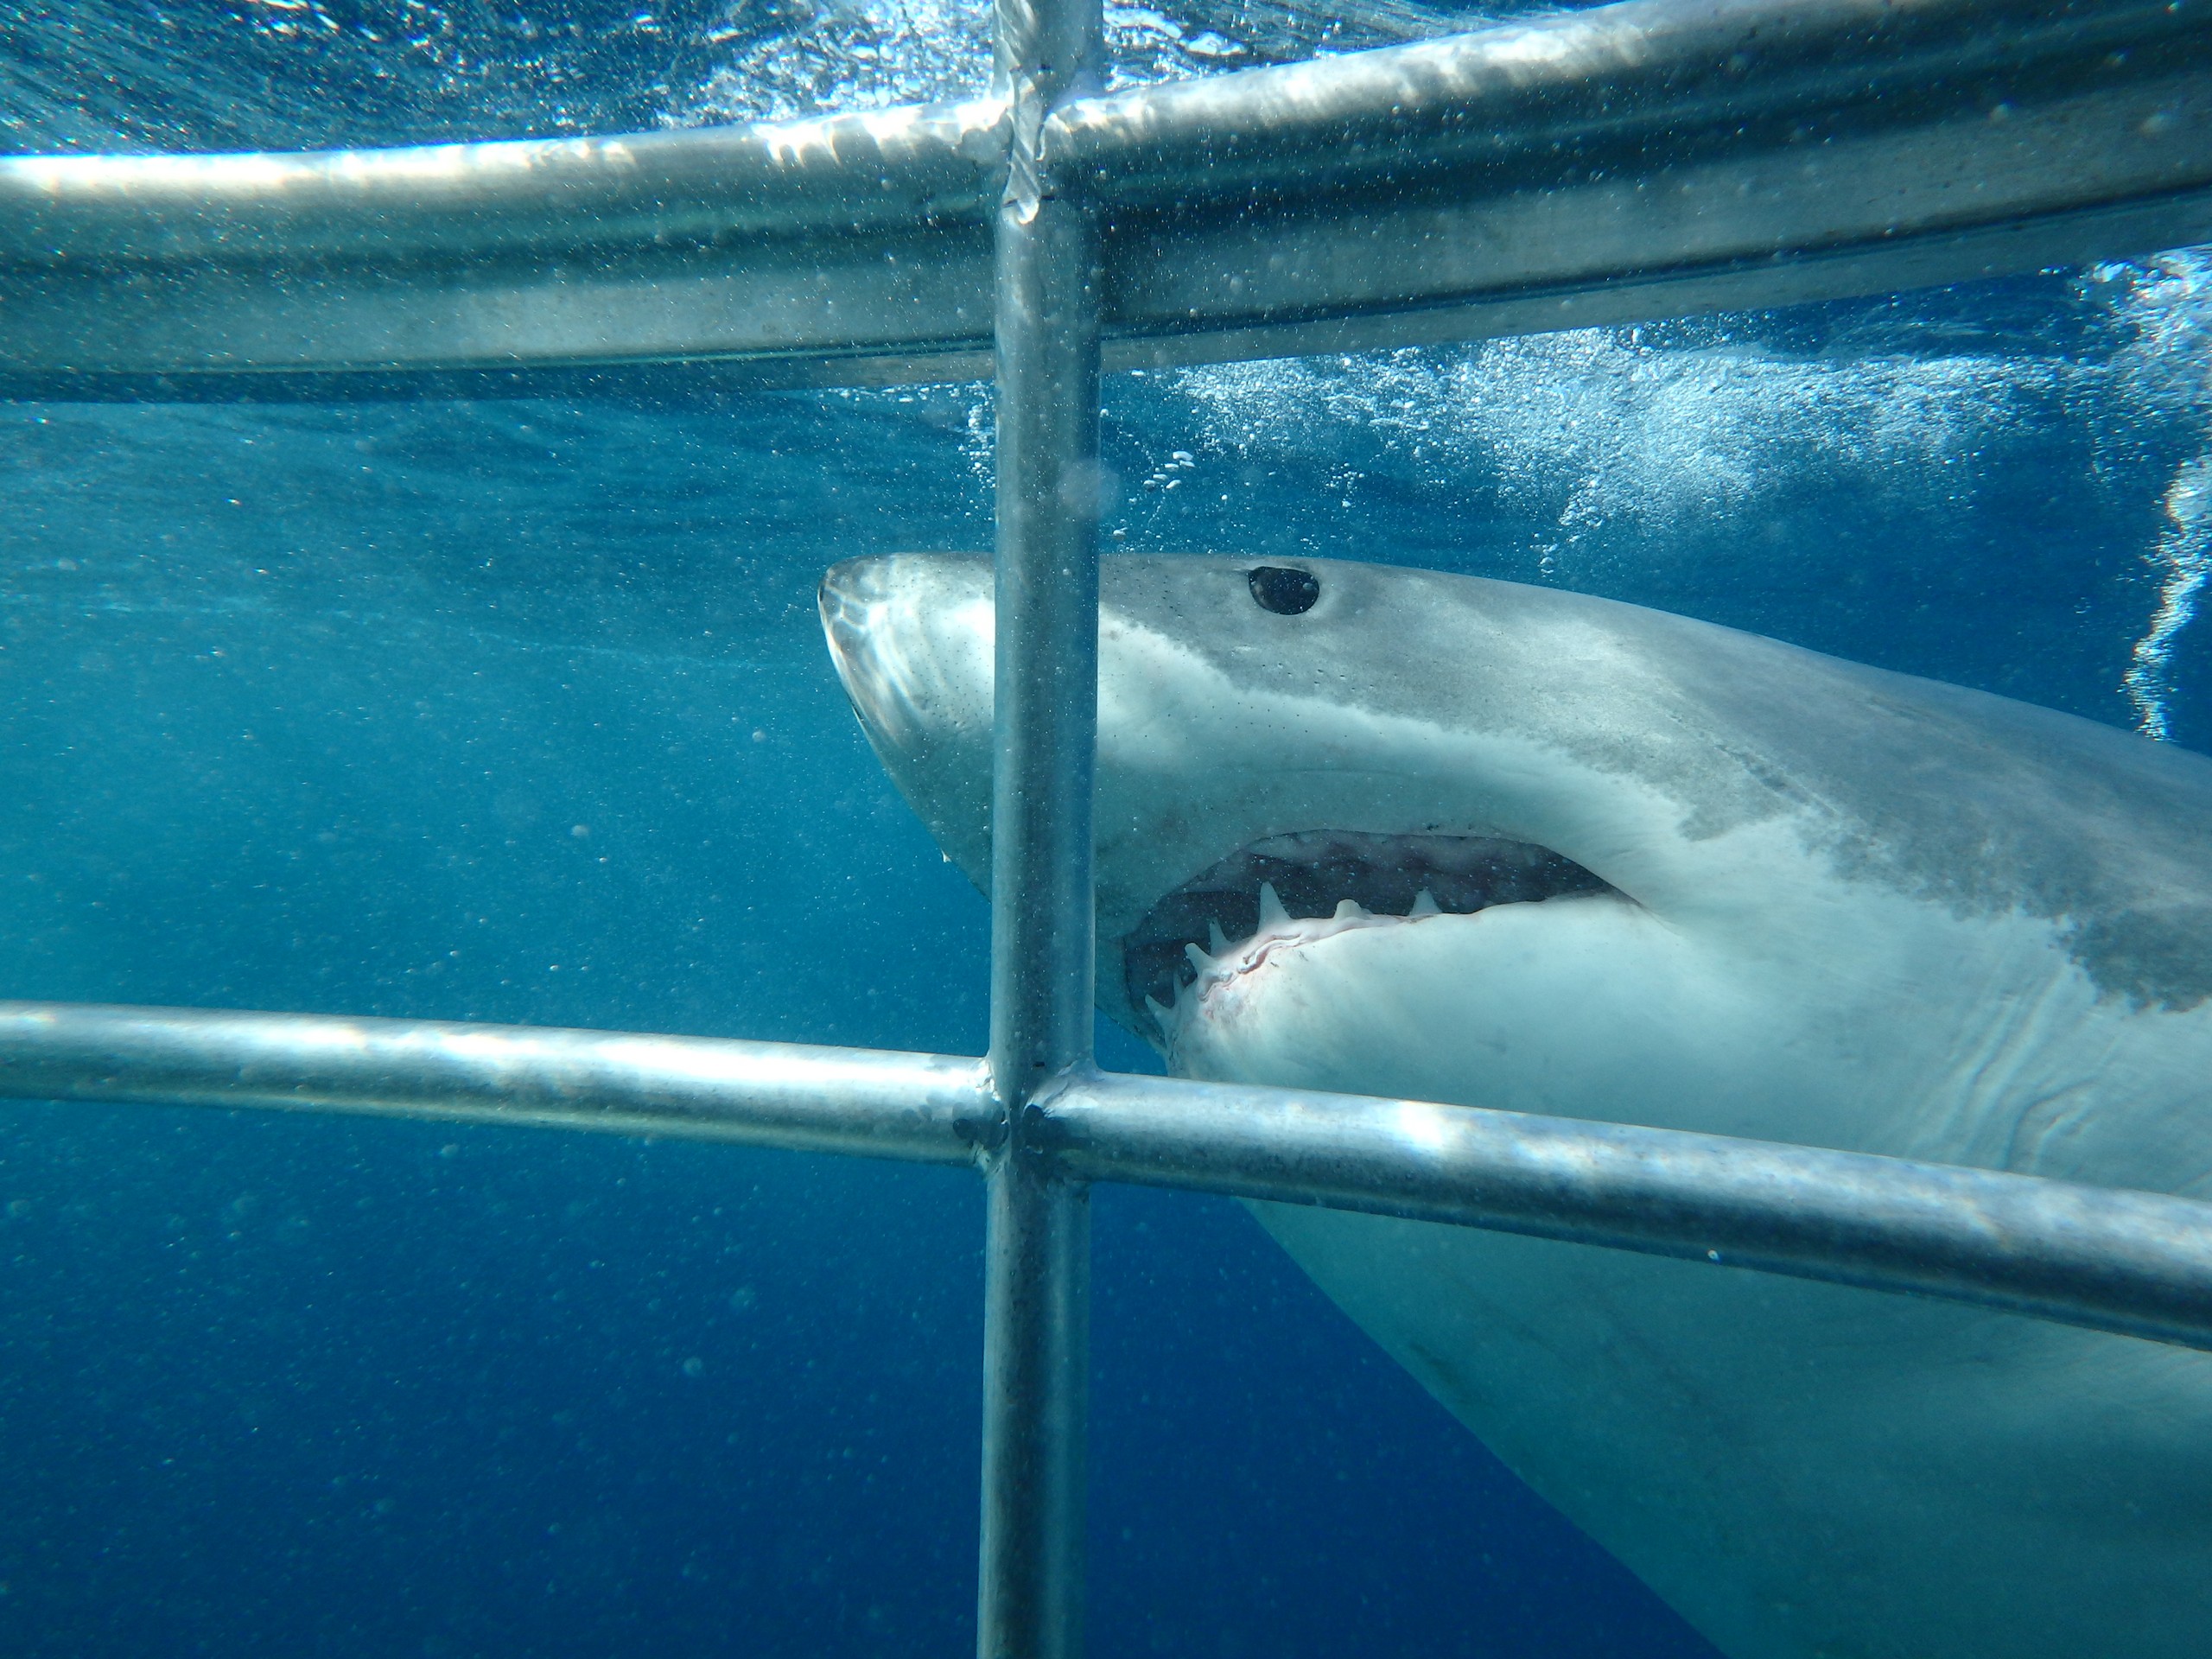 Shark seen from up close while cage diving